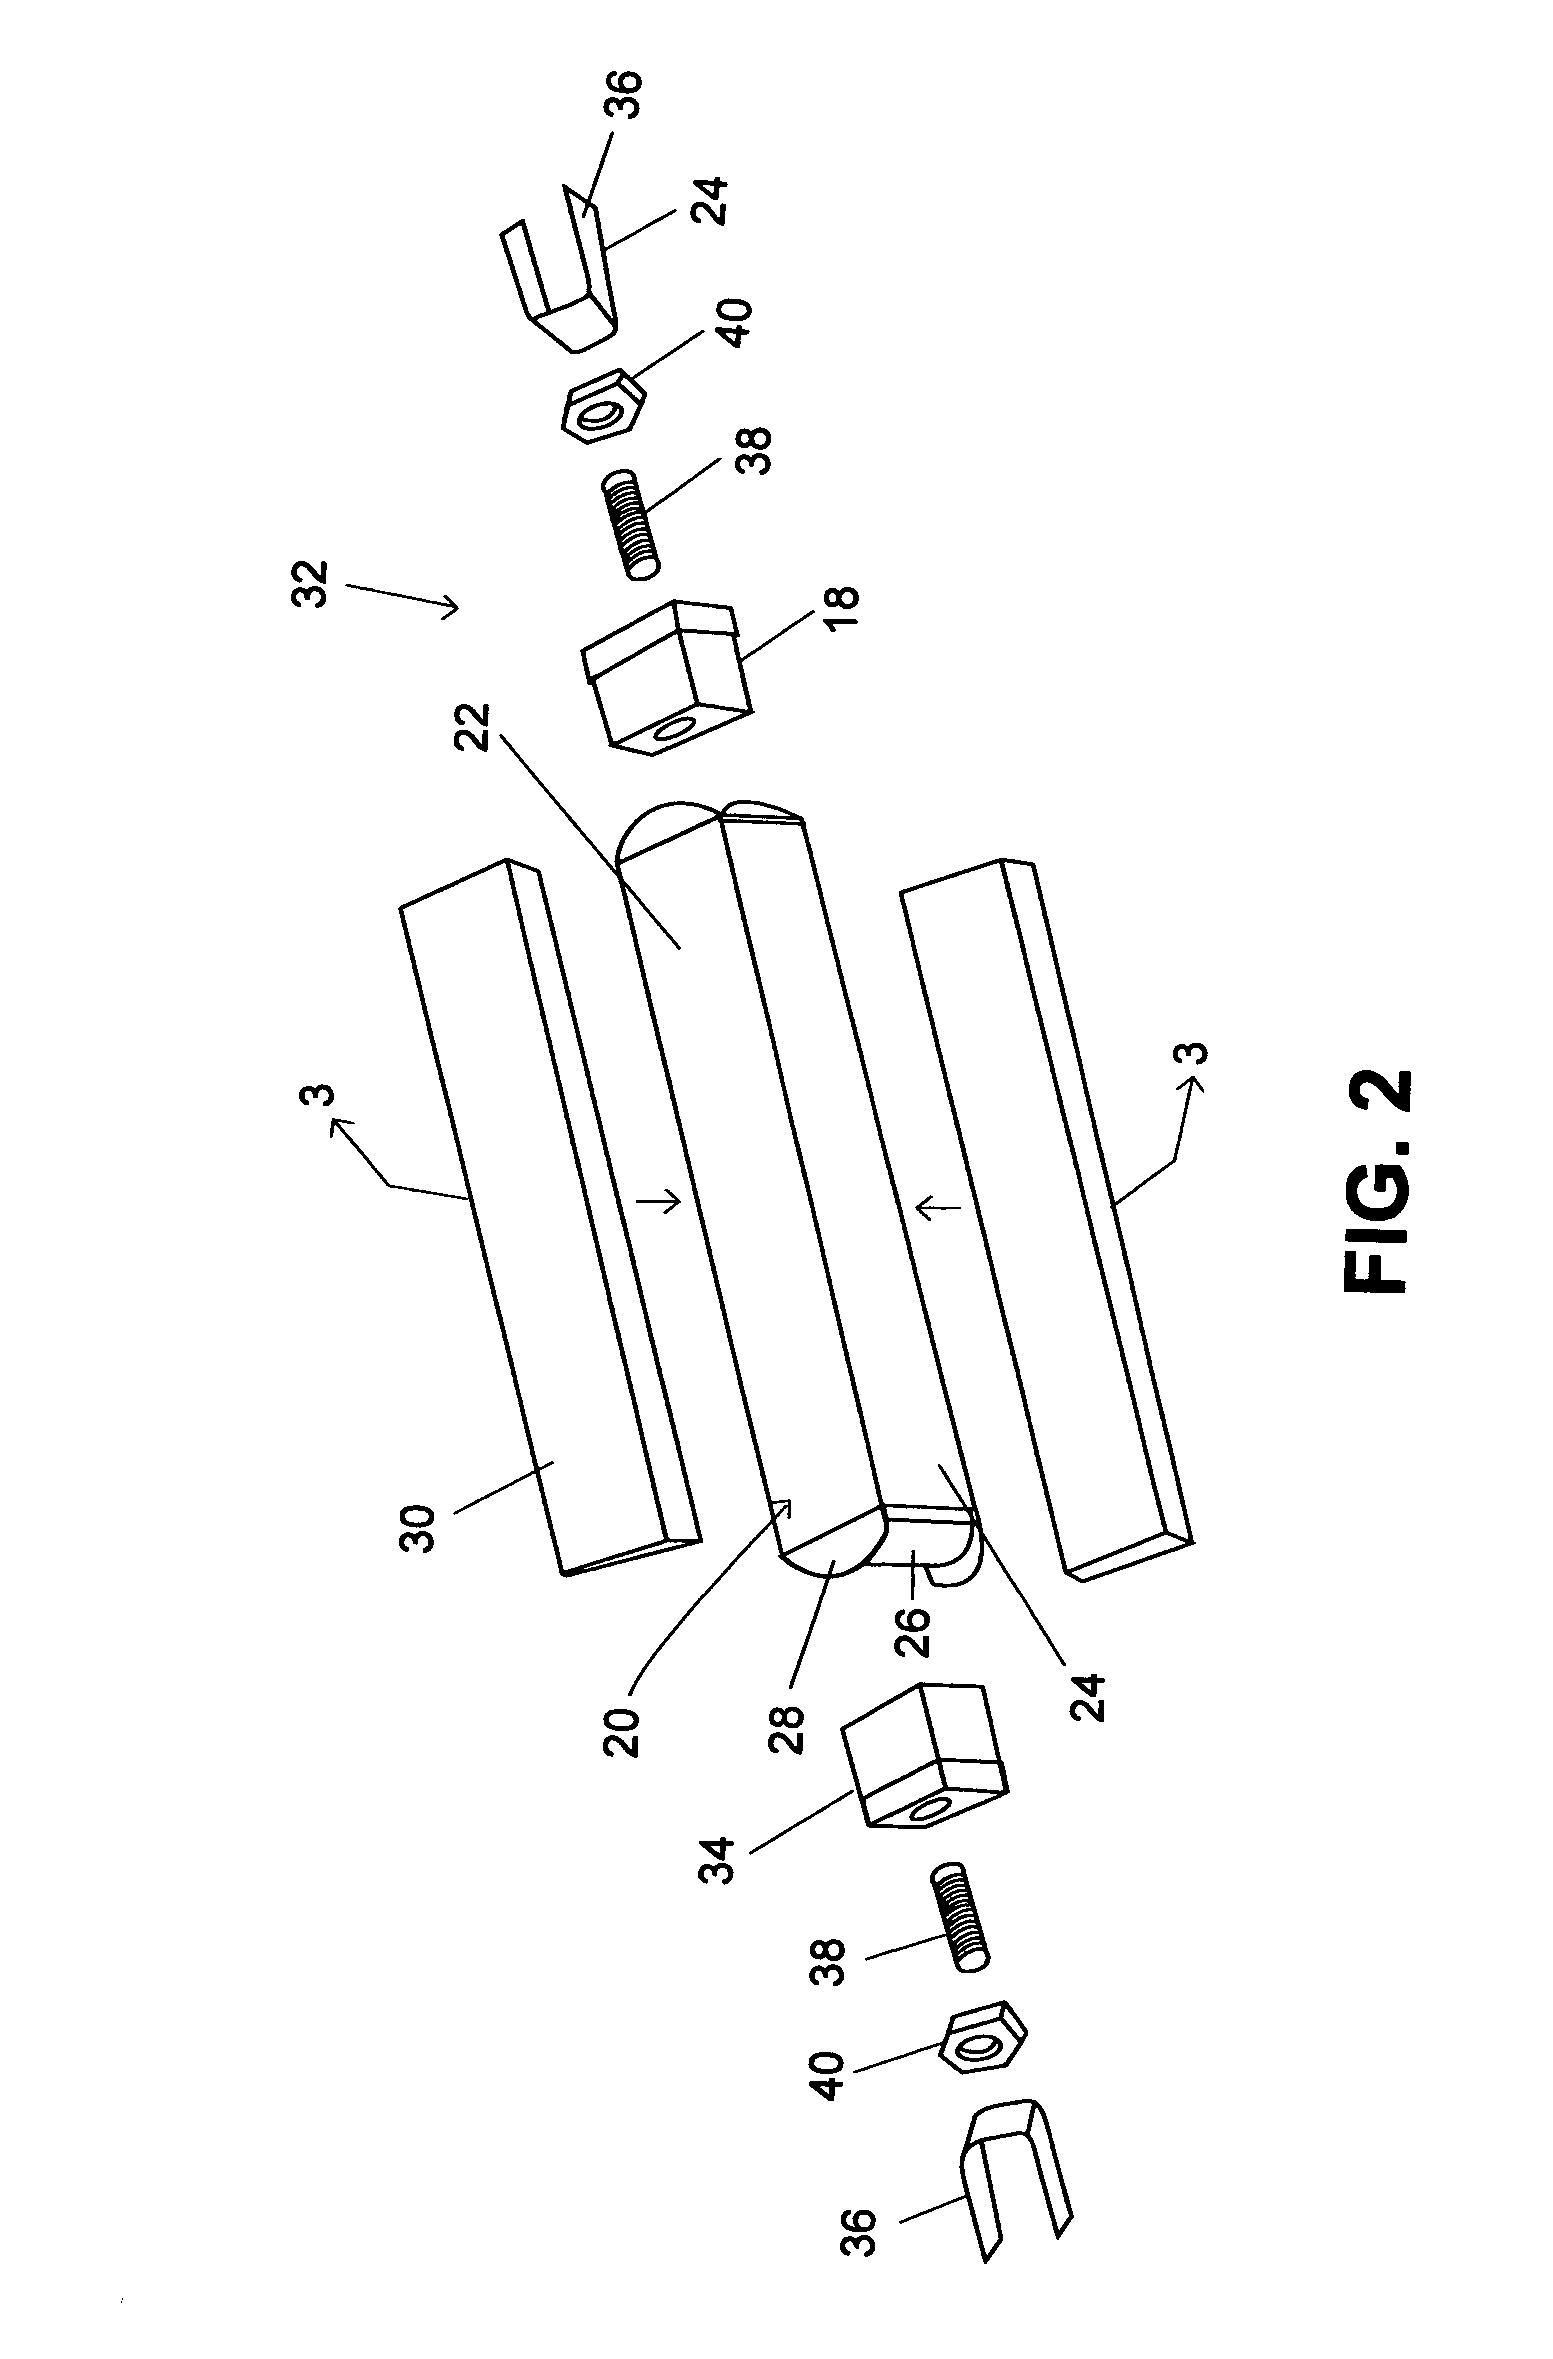 Reinforced tension and compression reacting strut and method of making same